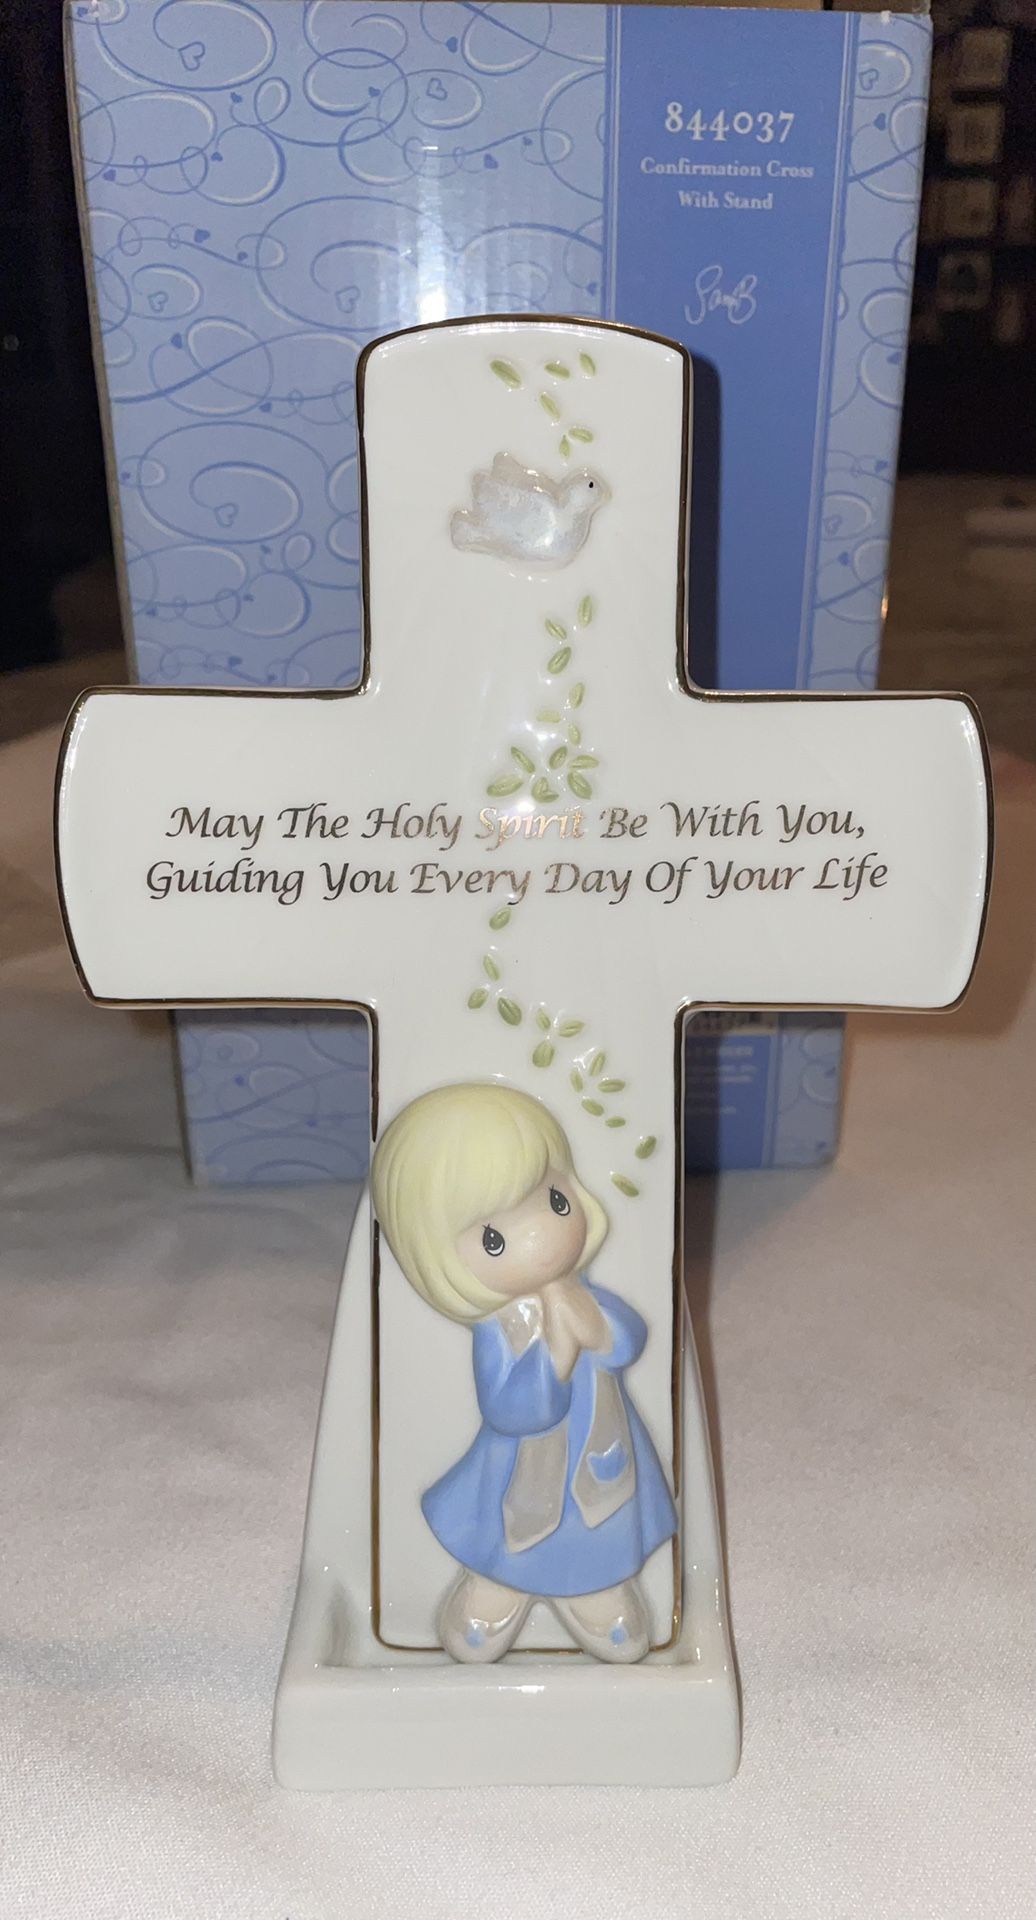 New In Box Precious Moment Confirmation Cross 7.5"  With Stand Girl # 844037